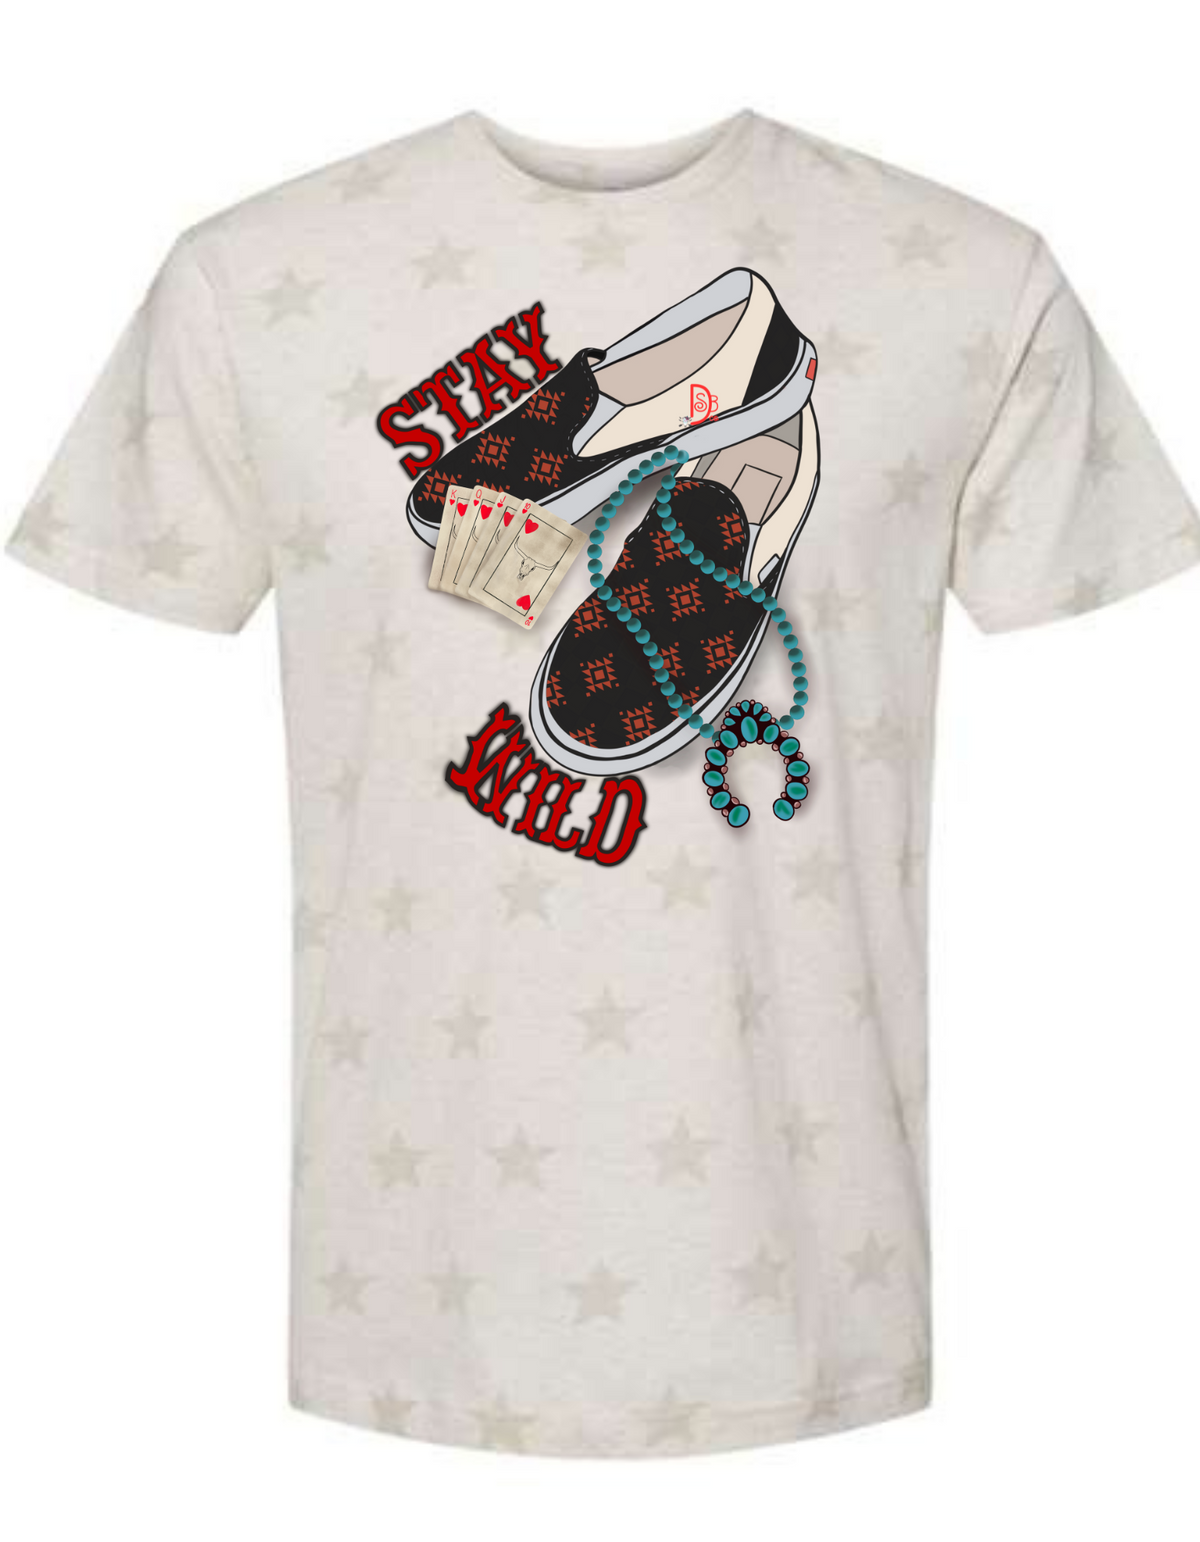 Stay Wild Punchy Graphic Tee-Graphic Tee's-Deadwood South Boutique & Company-Deadwood South Boutique, Women's Fashion Boutique in Henderson, TX